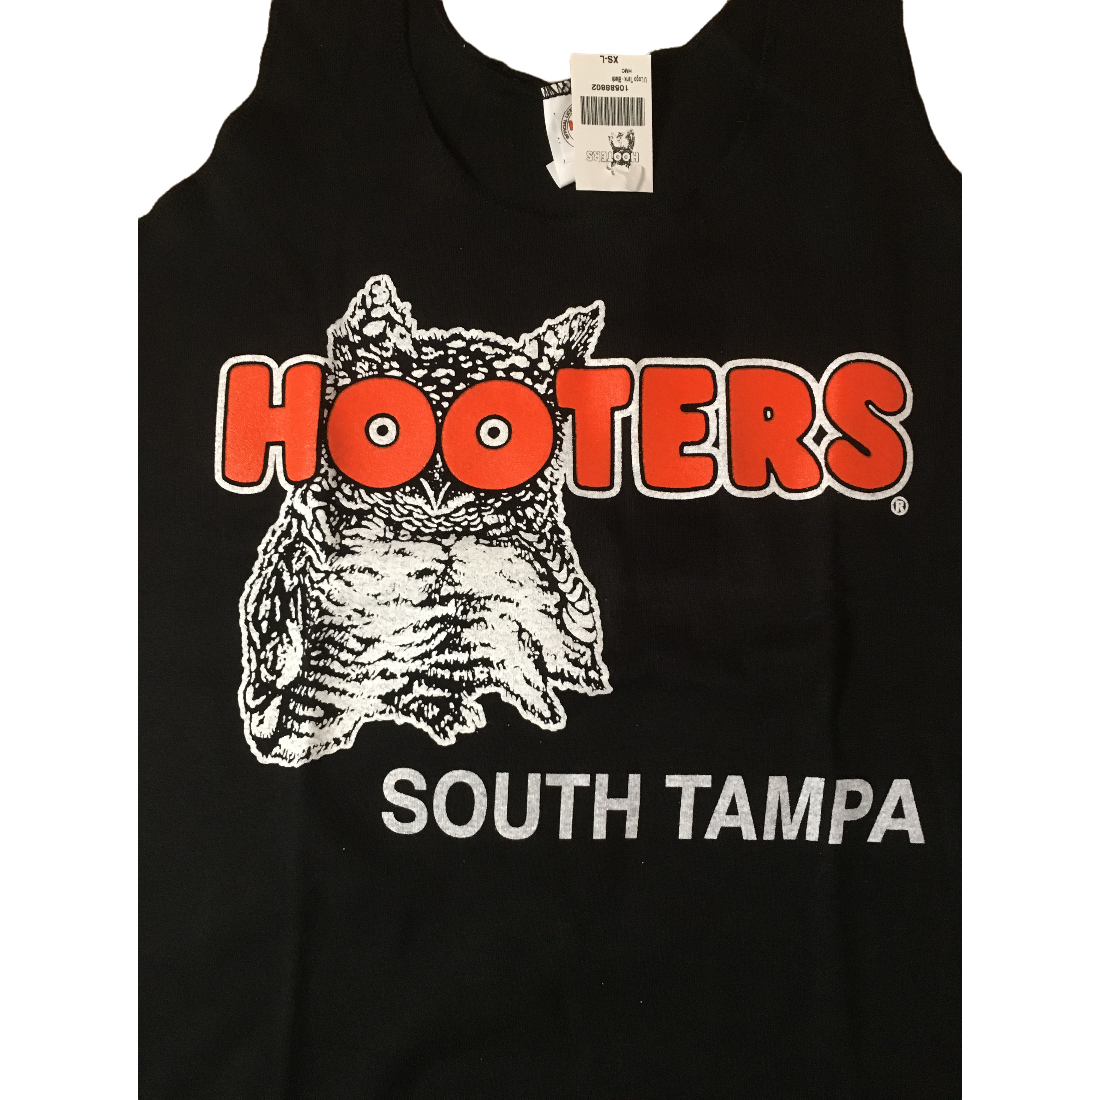 South Tampa Hooters Women's Outfit Costume Black Tank Top